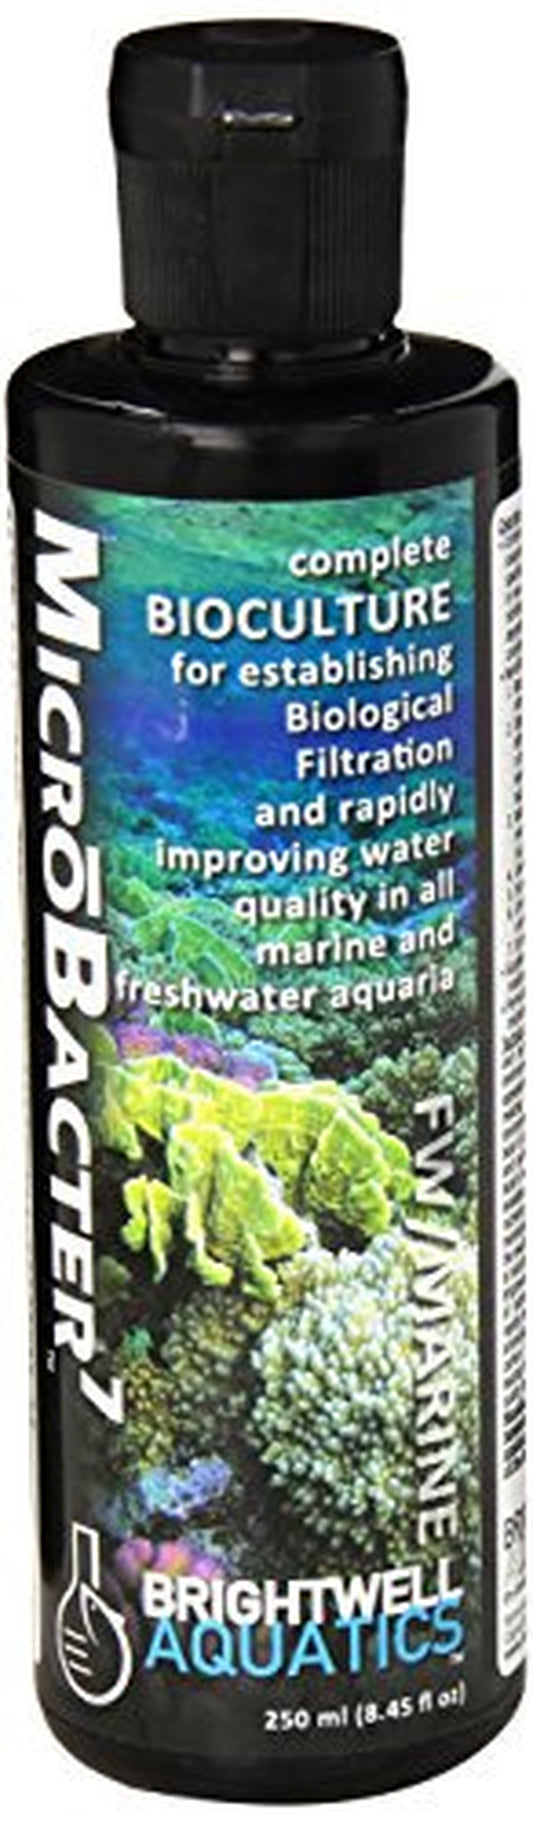 Brightwell Aquatics Microbacter7 - Bacteria & Water Conditioner for Fish Tank or Aquarium, Populates Biological Filter Media for Saltwater and Freshwater Fish